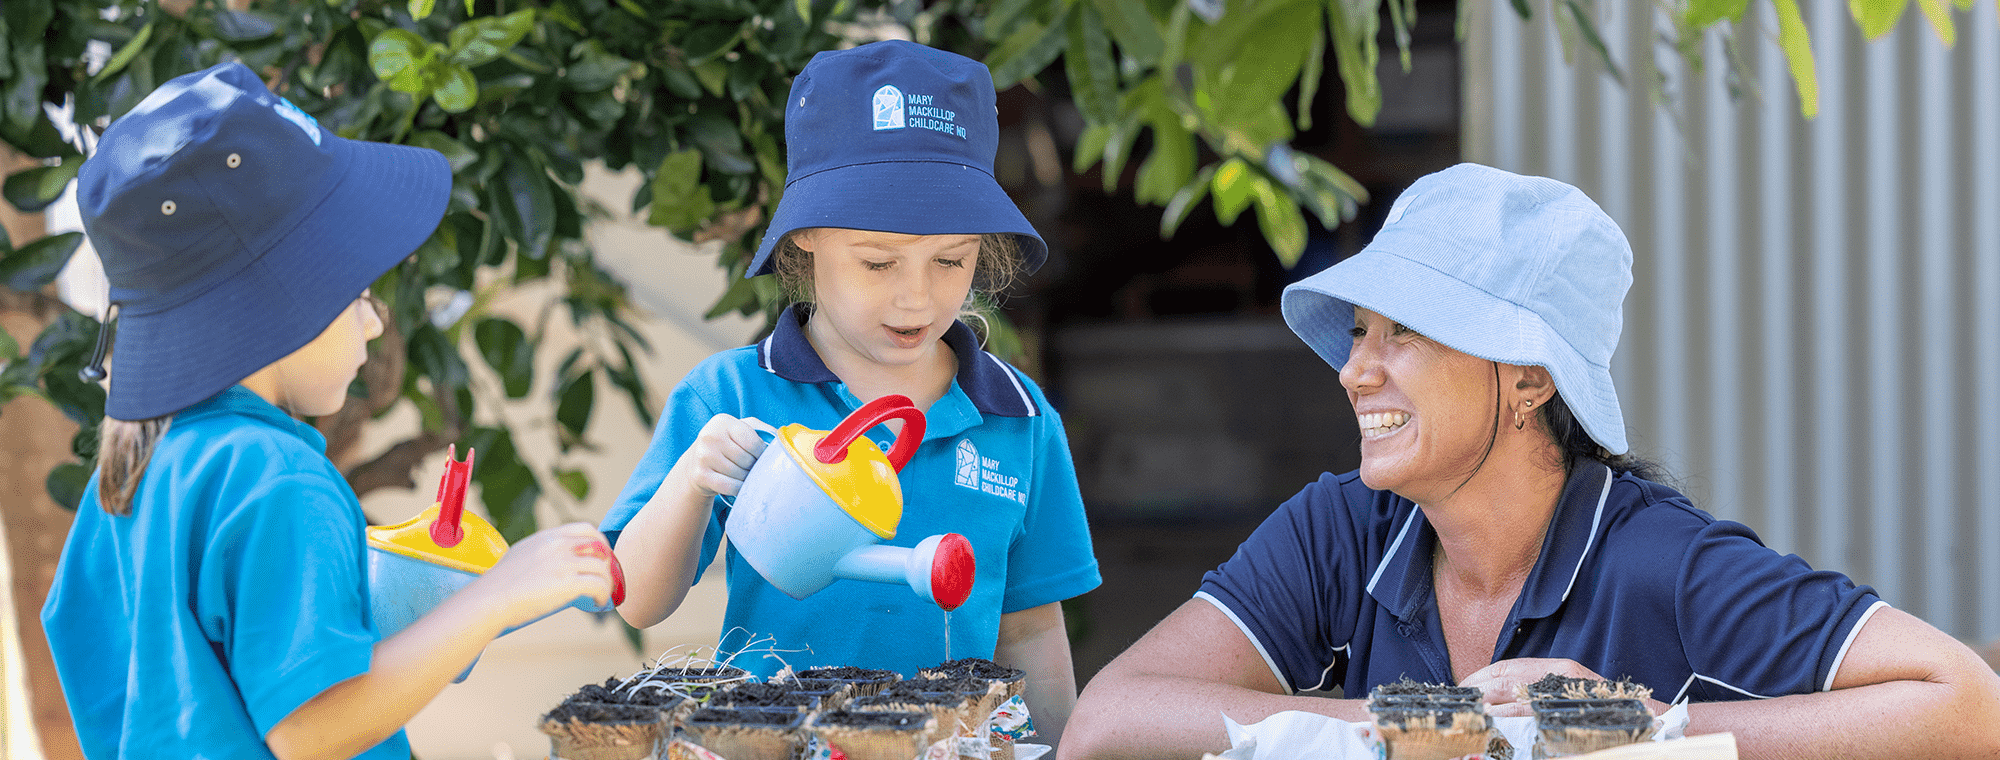 St. Mary MacKillop Inspires the Services of Mary MacKillop Childcare North Queensland